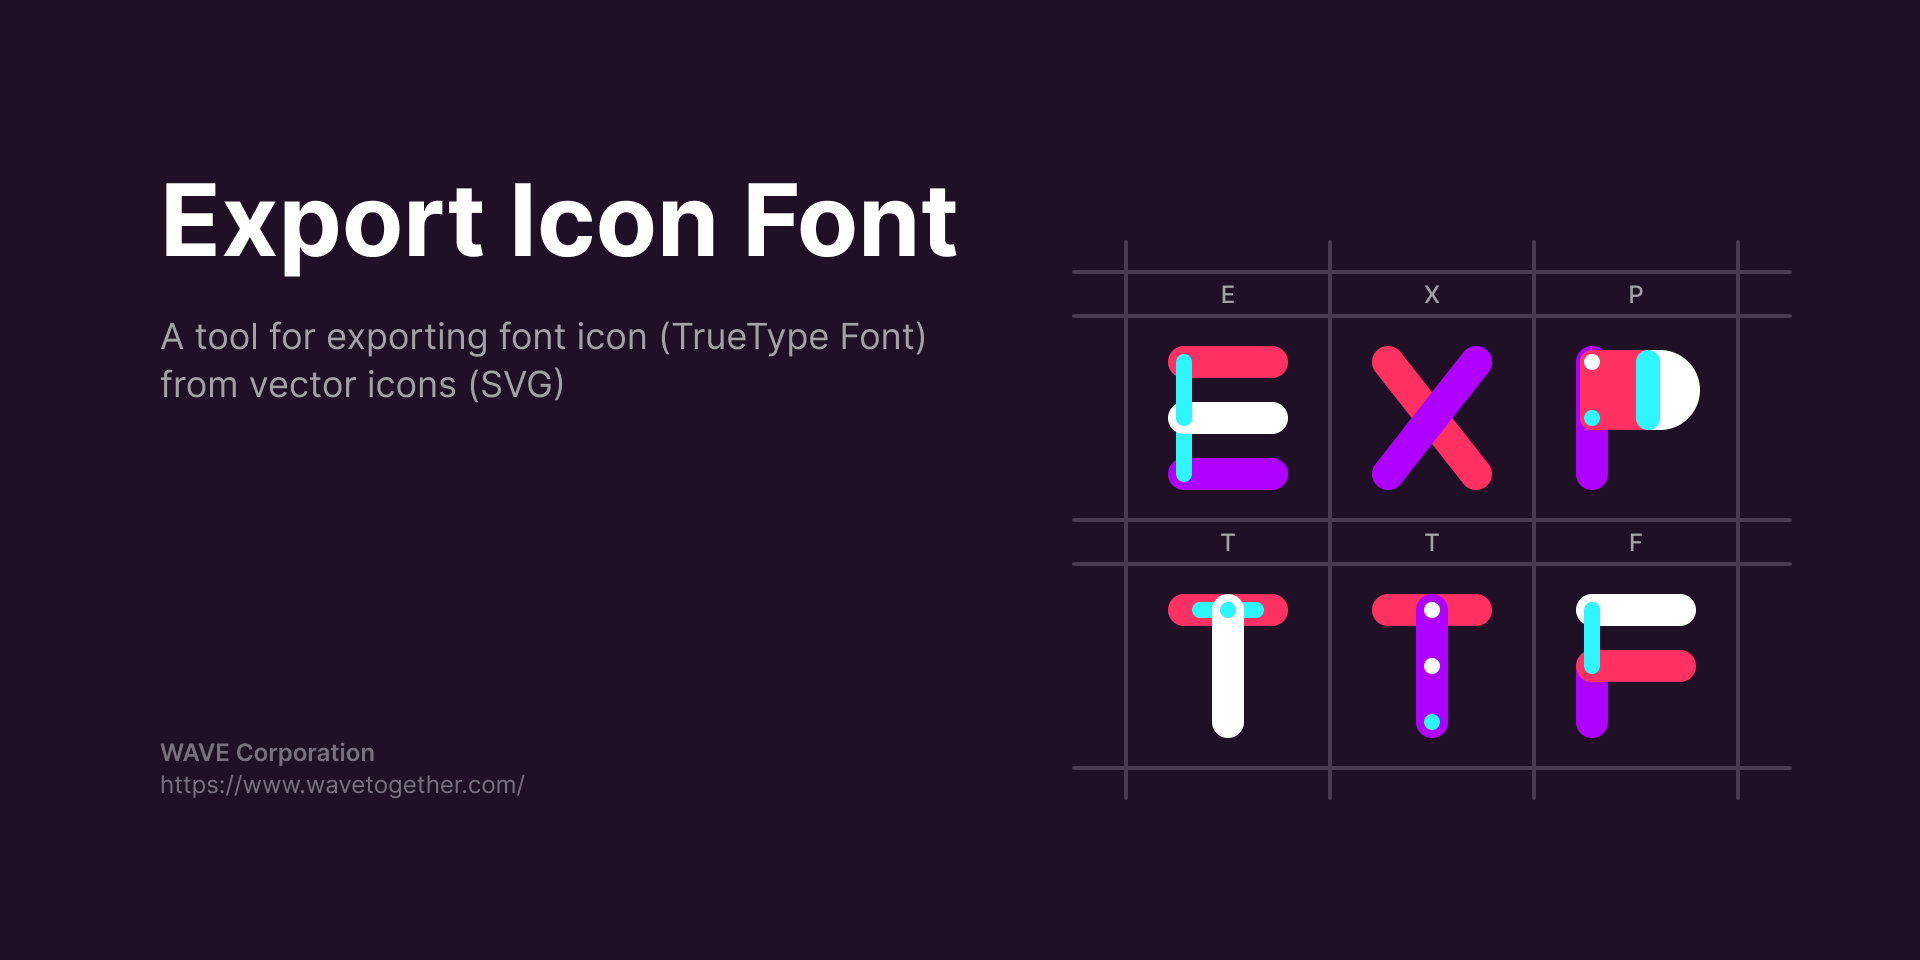 Export Icon Font